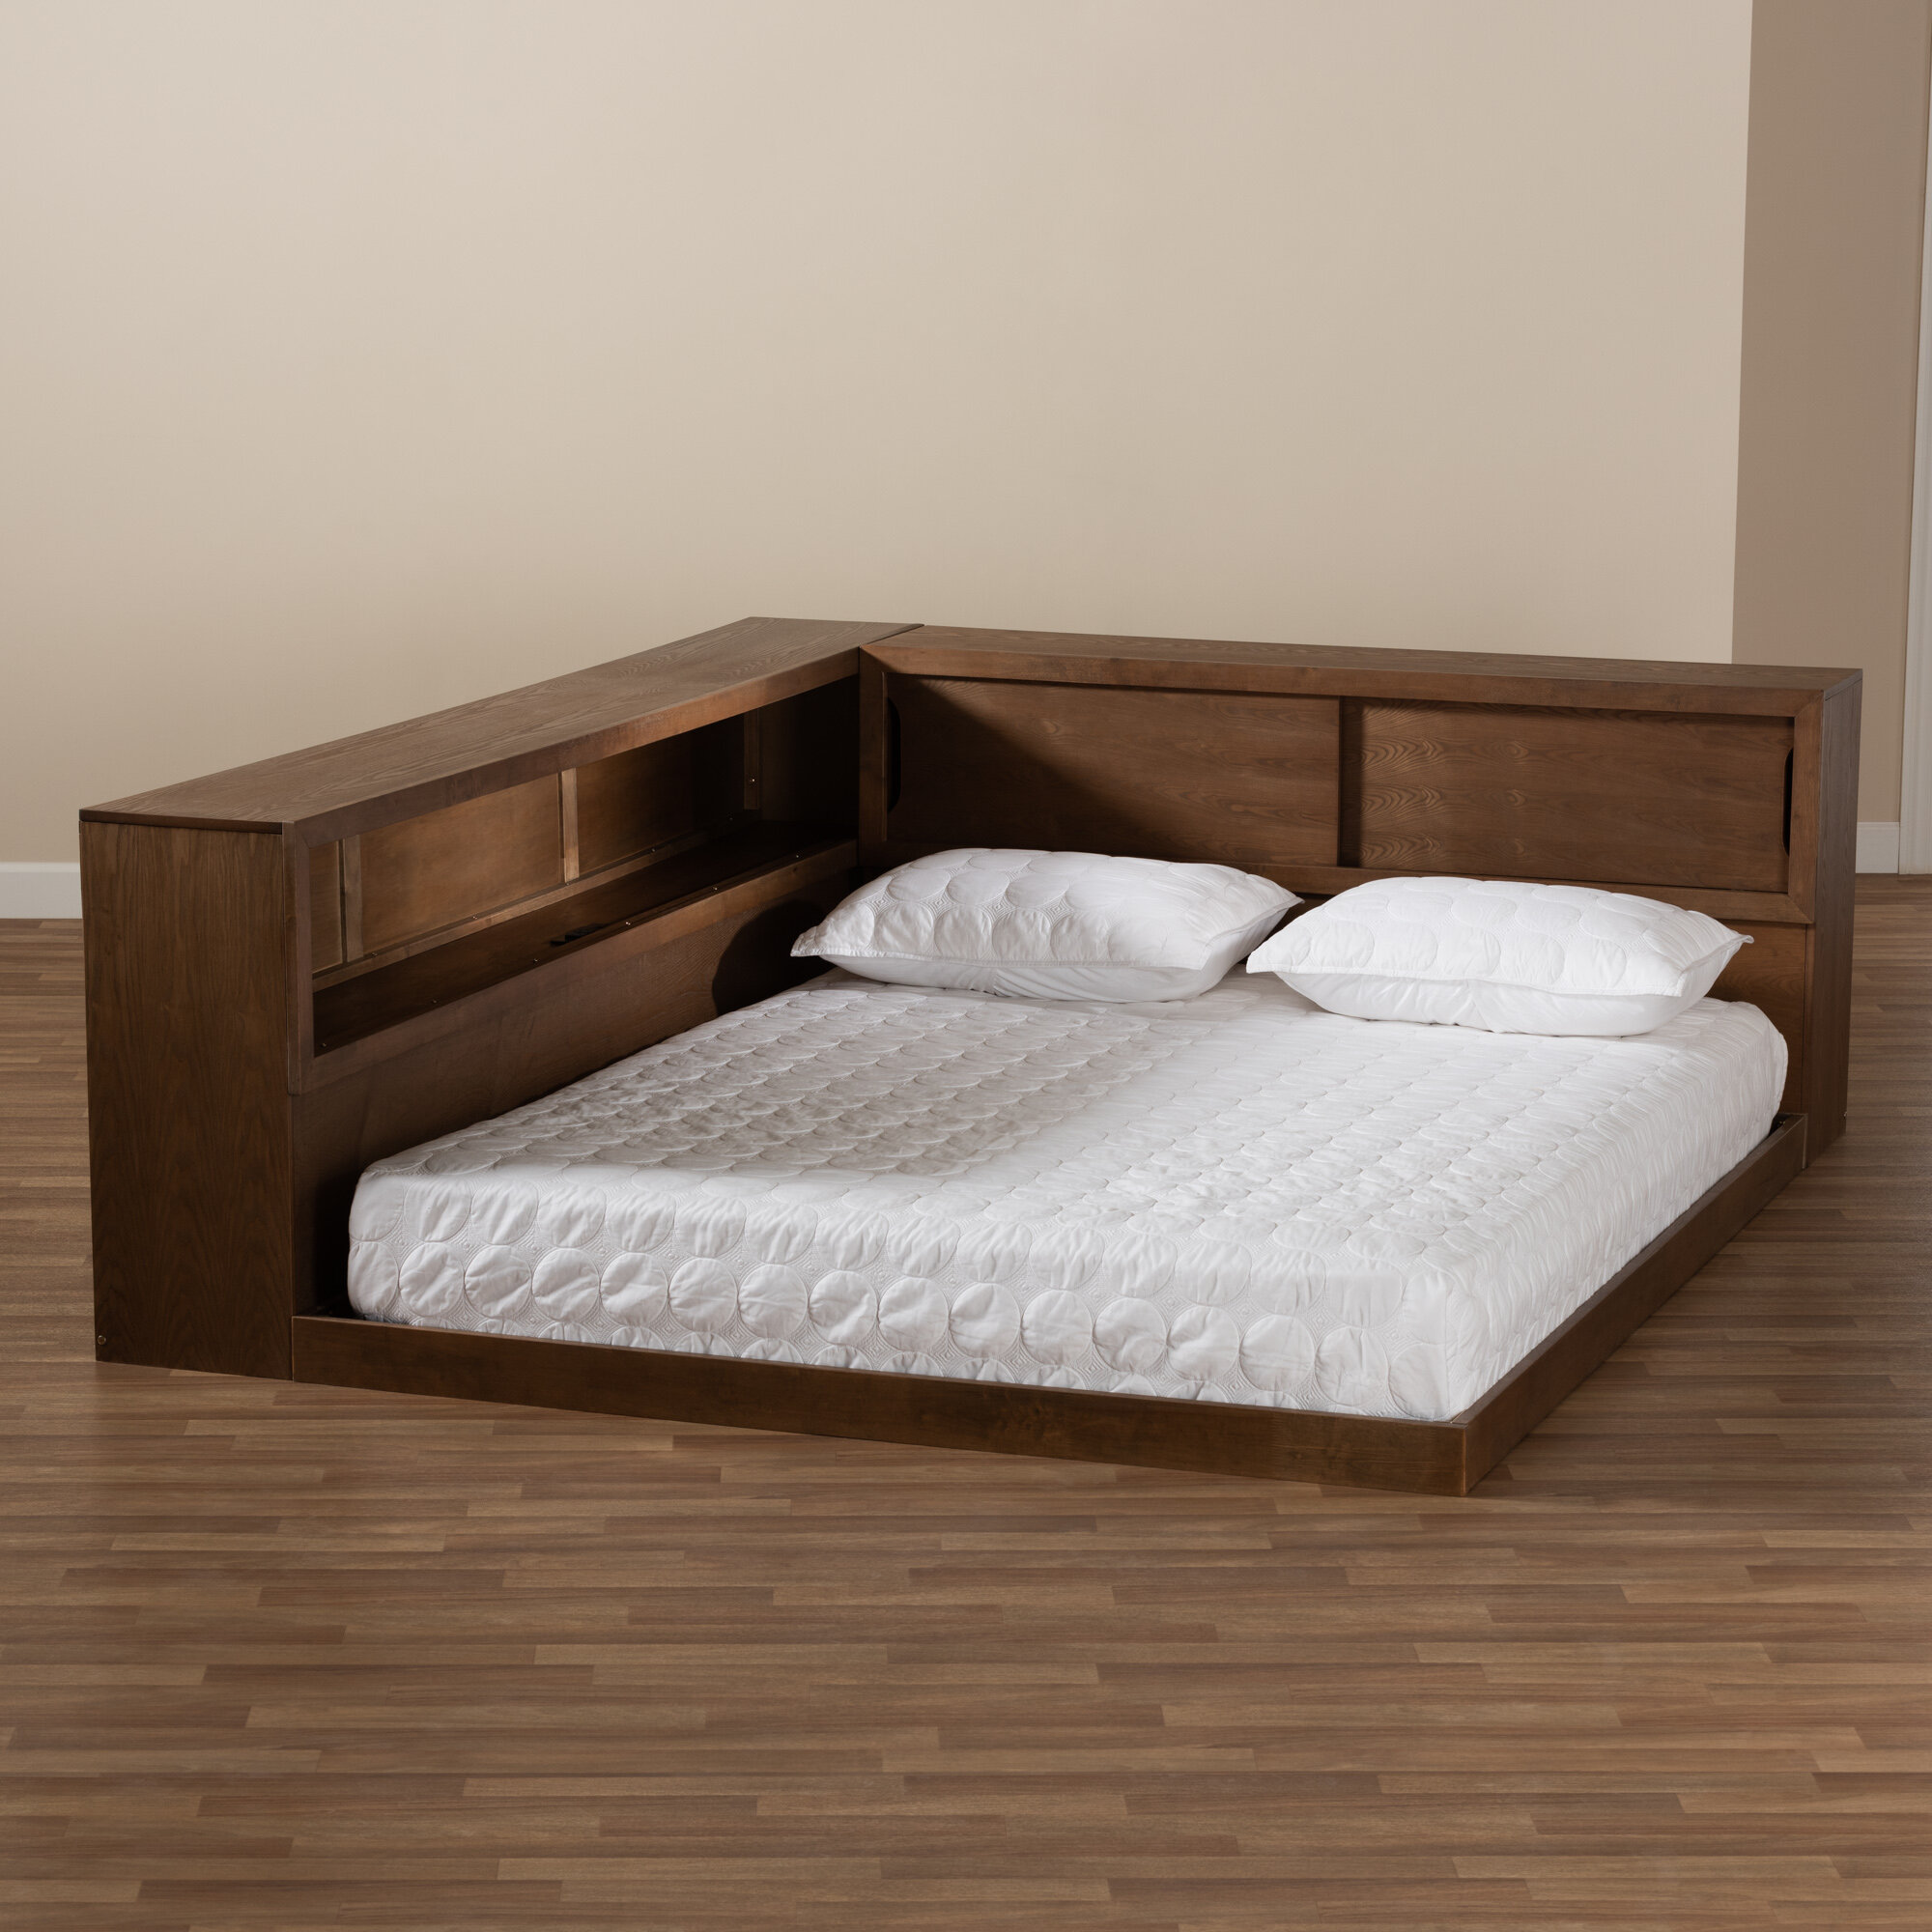 Wooden Bed Frame Queen With Storage / Lift mechanism & bed frame with